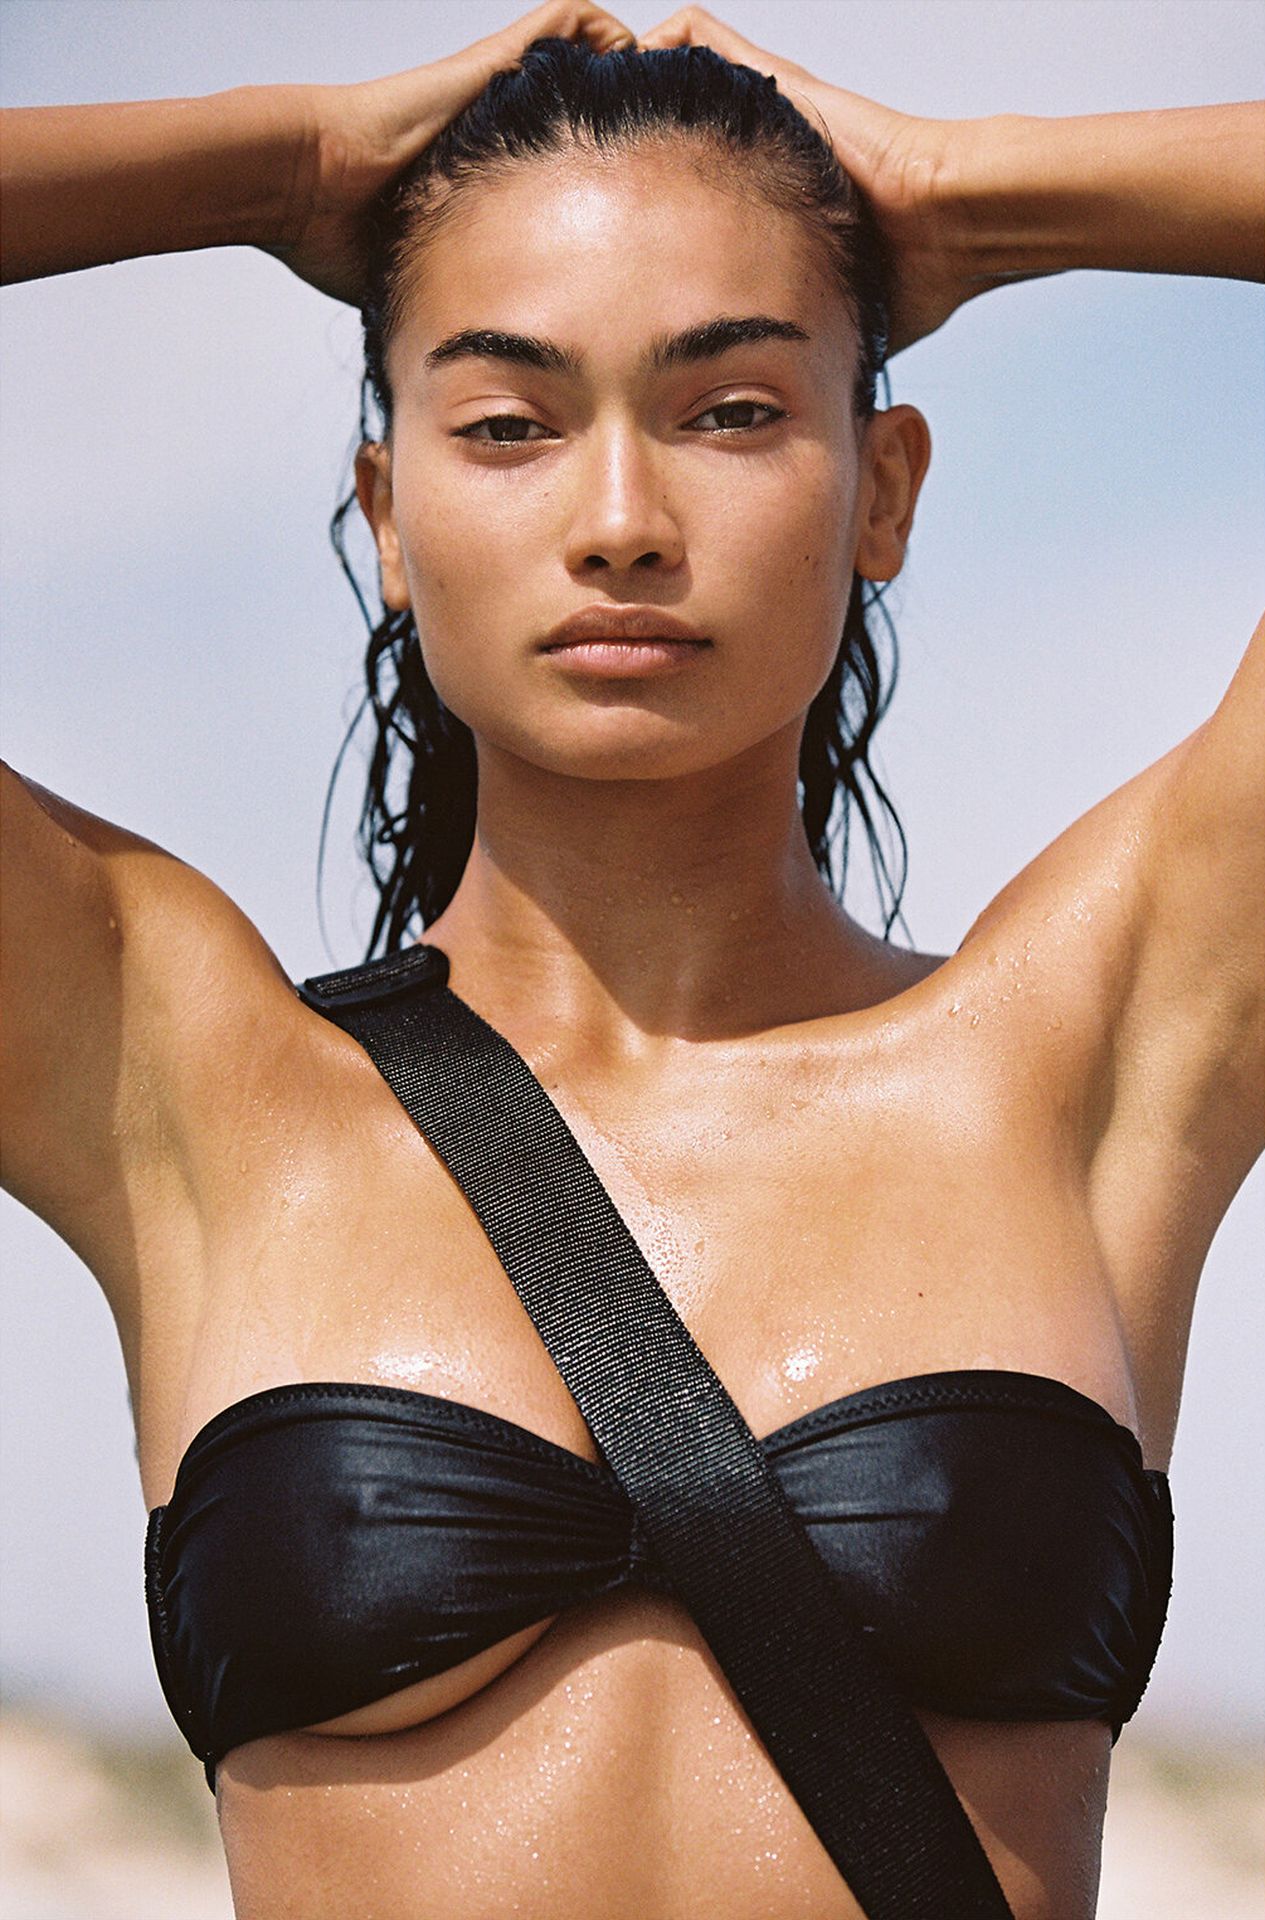 Kelly Gale’s Tits & Ass (35 Photos)